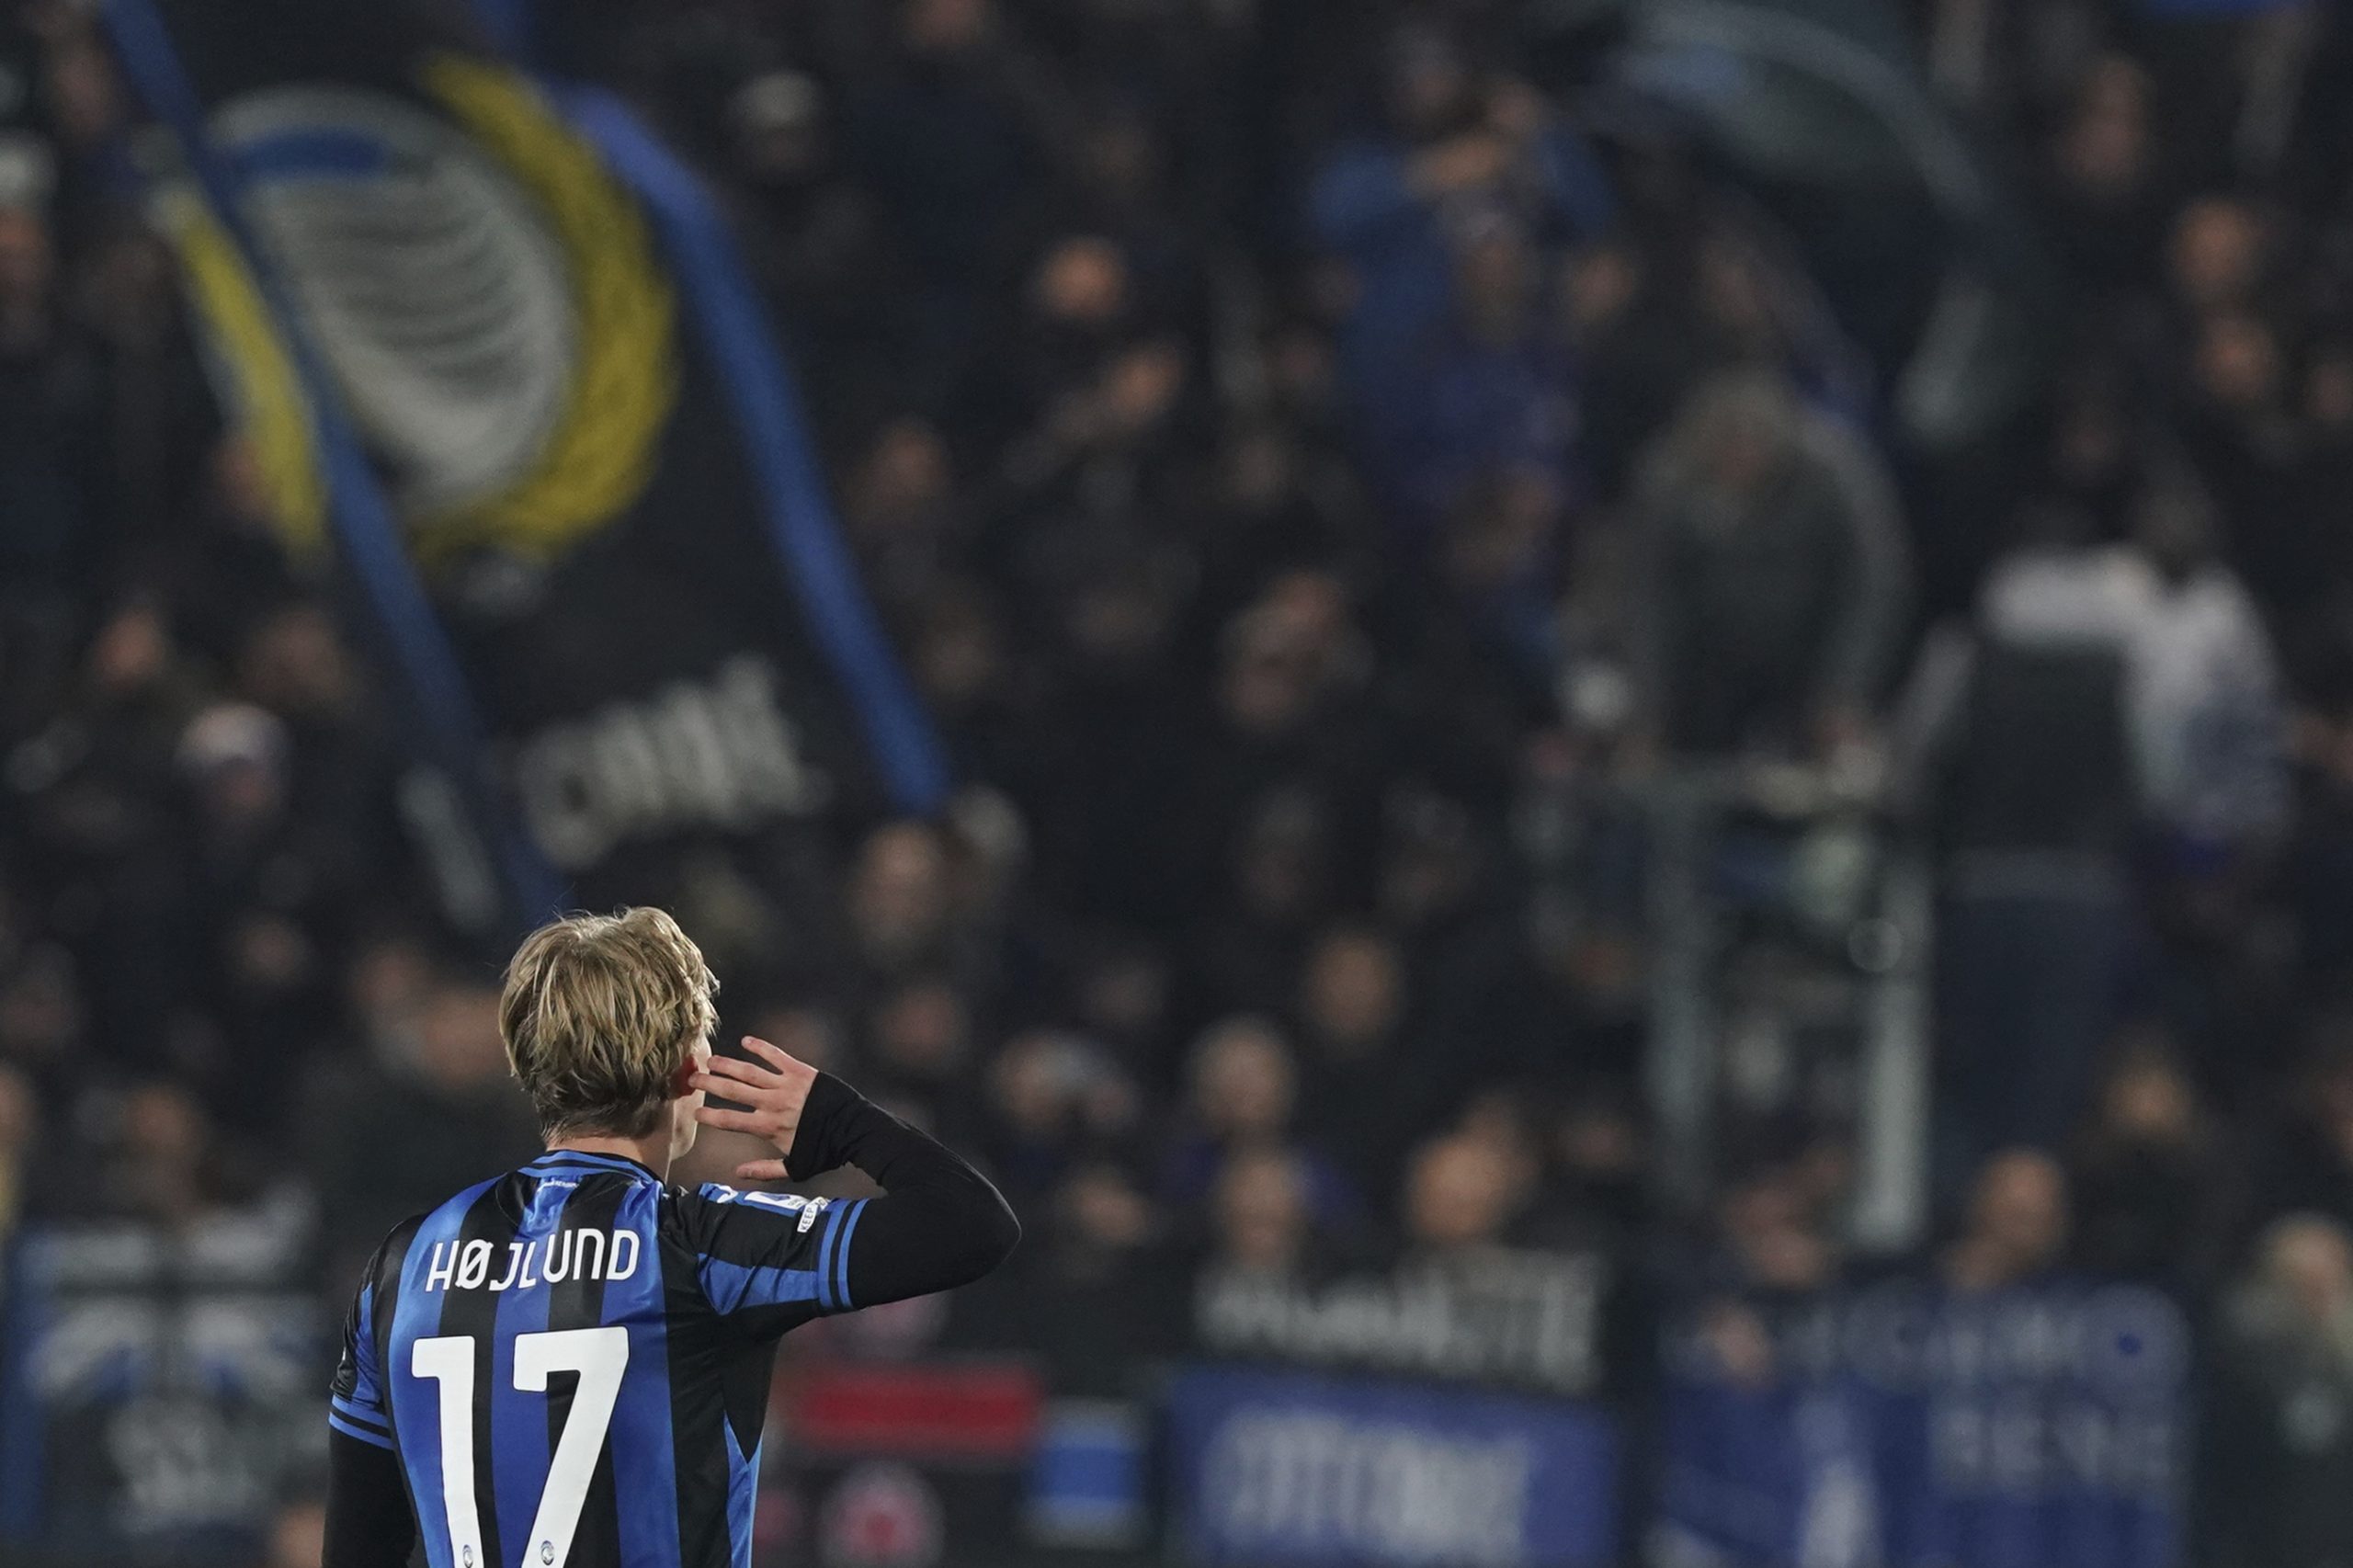 Rasmus Winther Hojlund celebrates after scoring to 2-1 during the Serie A soccer match between Atalanta BC and FC Empoli at the Gewiss stadium in Bergamo, Italy, Friday March 17, 2023. (Spada/LaPresse via AP)